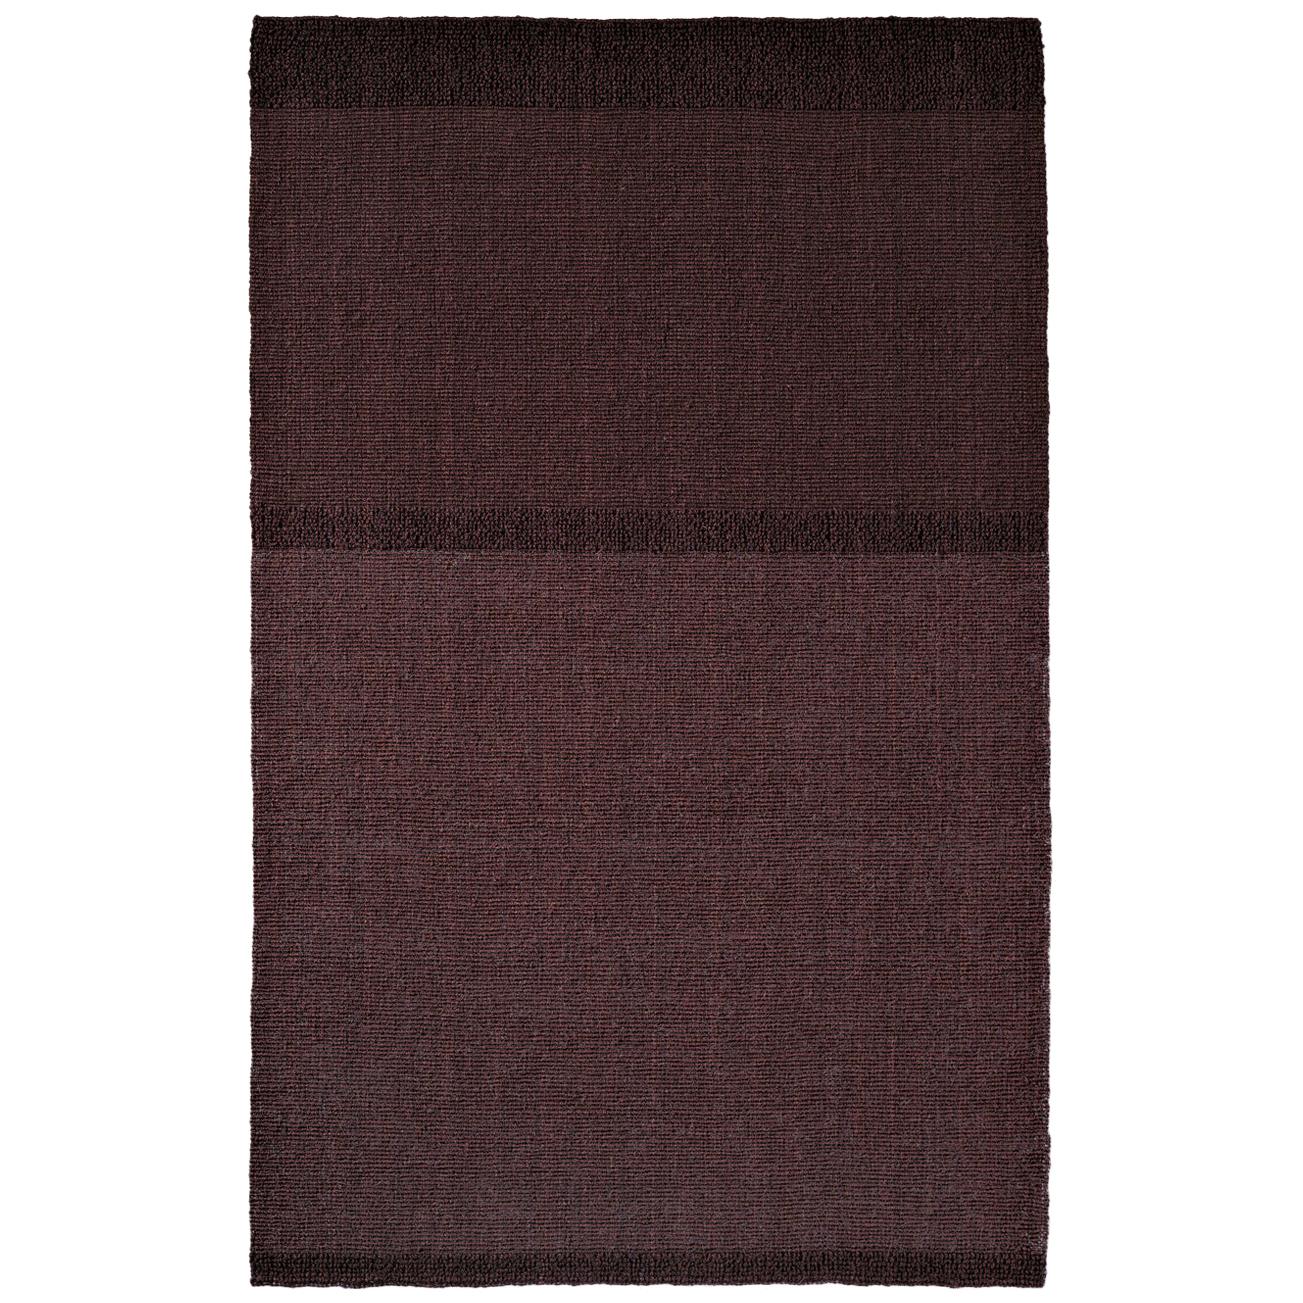 21st Century Brown Coconut Fiber Rug by Deanna Comellini In Stock 200x323 cm For Sale